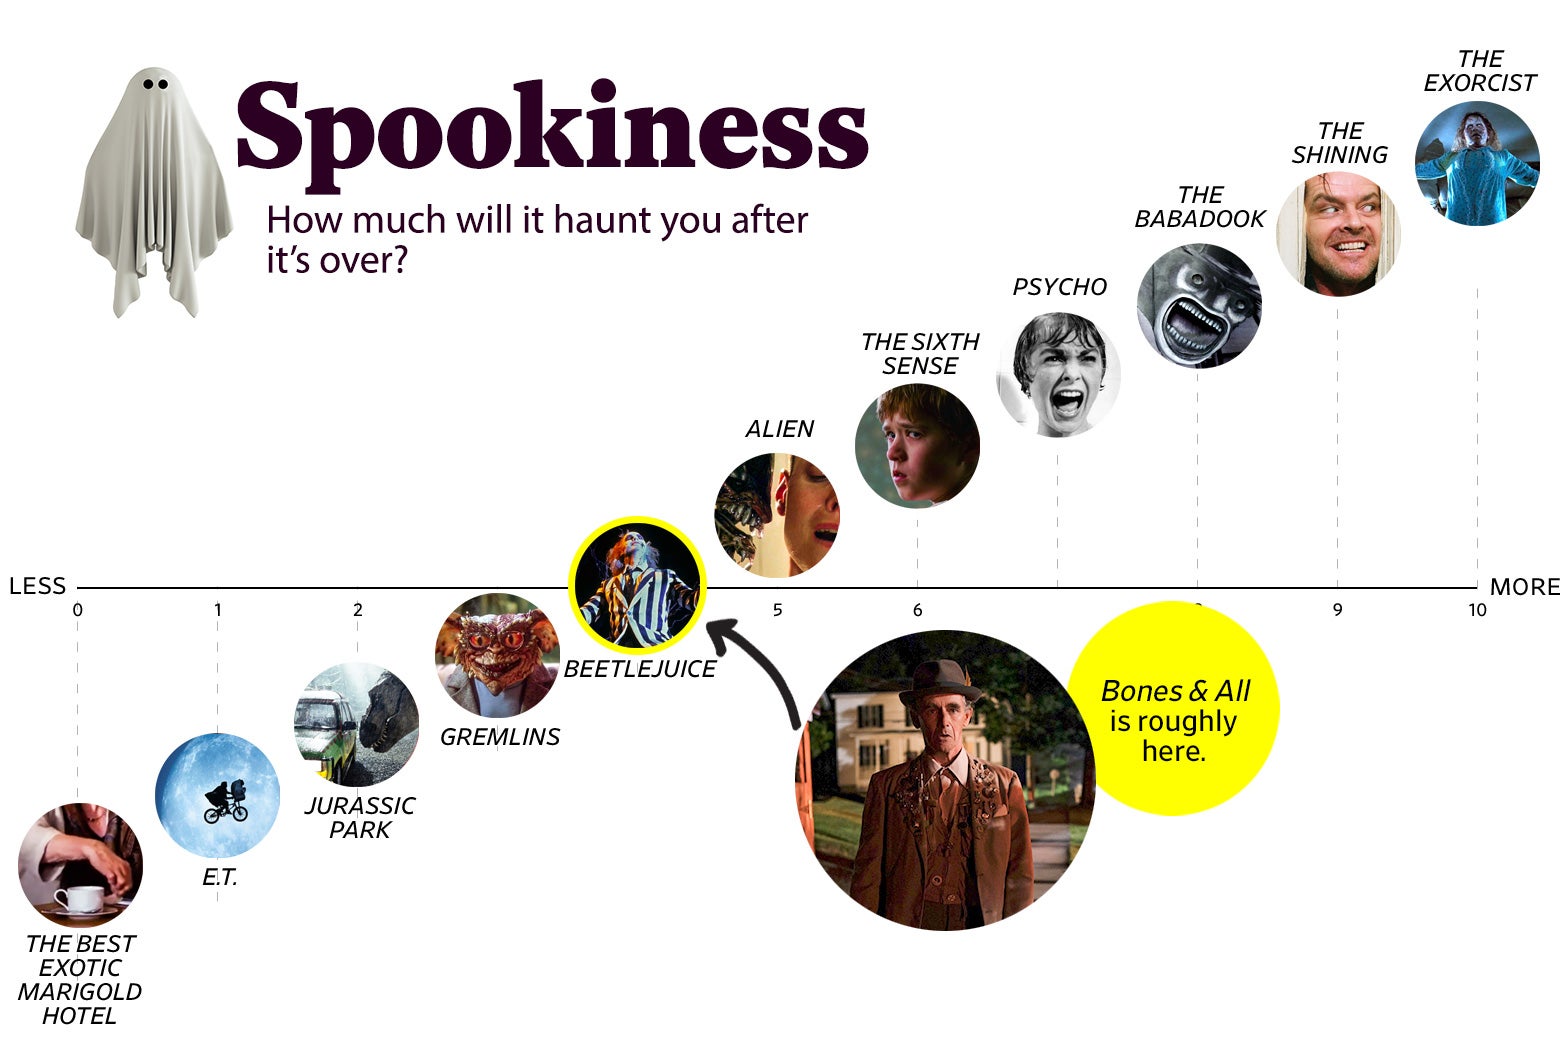 A chart titled “Spookiness: How much will it haunt you after the movie is over?” shows that Bones and All ranks a 4 in spookiness, roughly the same as Beetlejuice. The scale ranges from The Best Exotic Marigold Hotel (0) to The Exorcist (10).